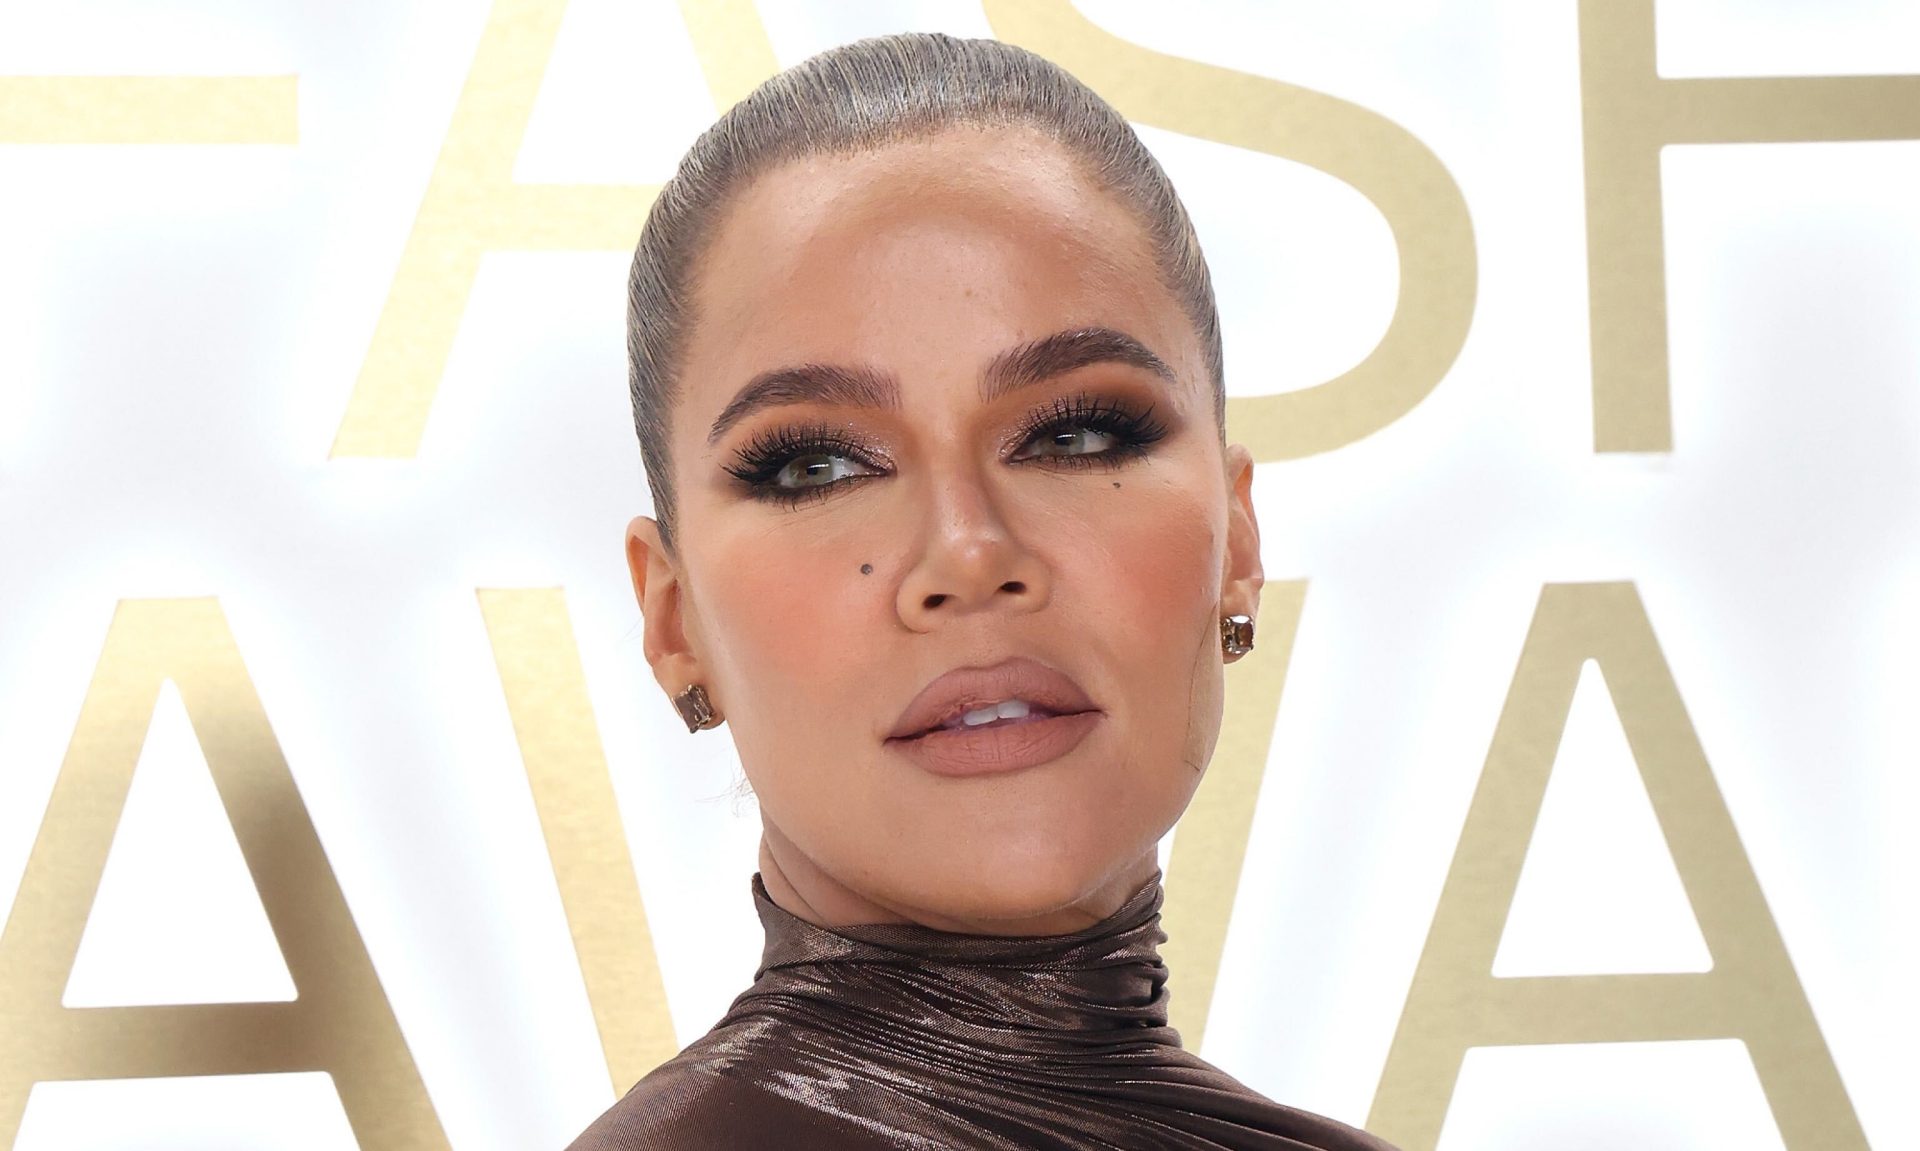 Khloé Kardashian Responds To Comments About Her Face’s Appearance And Using Filter